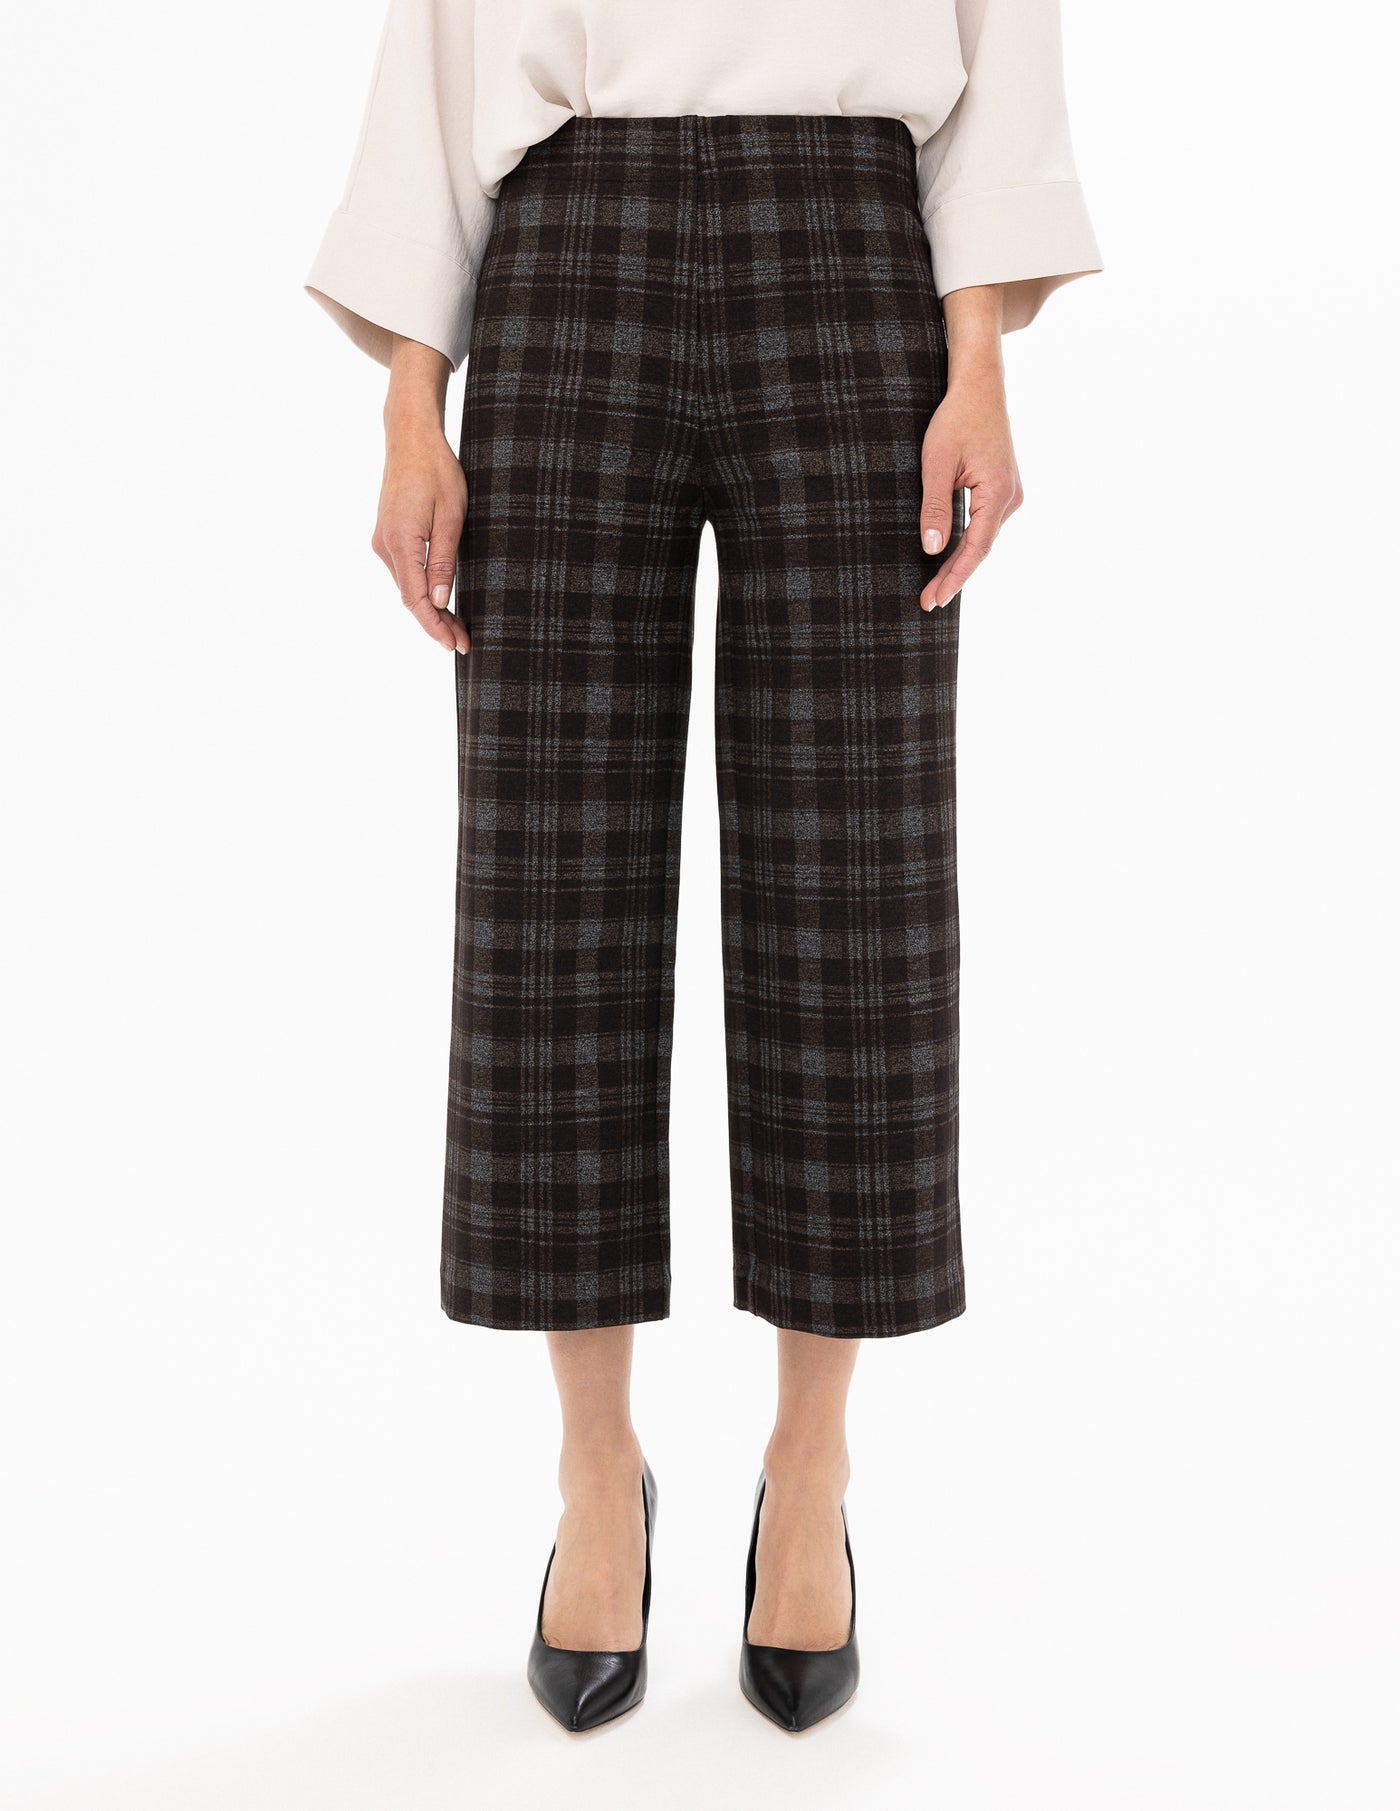 Pull On Knit Check Pants (Chocolate Combo)